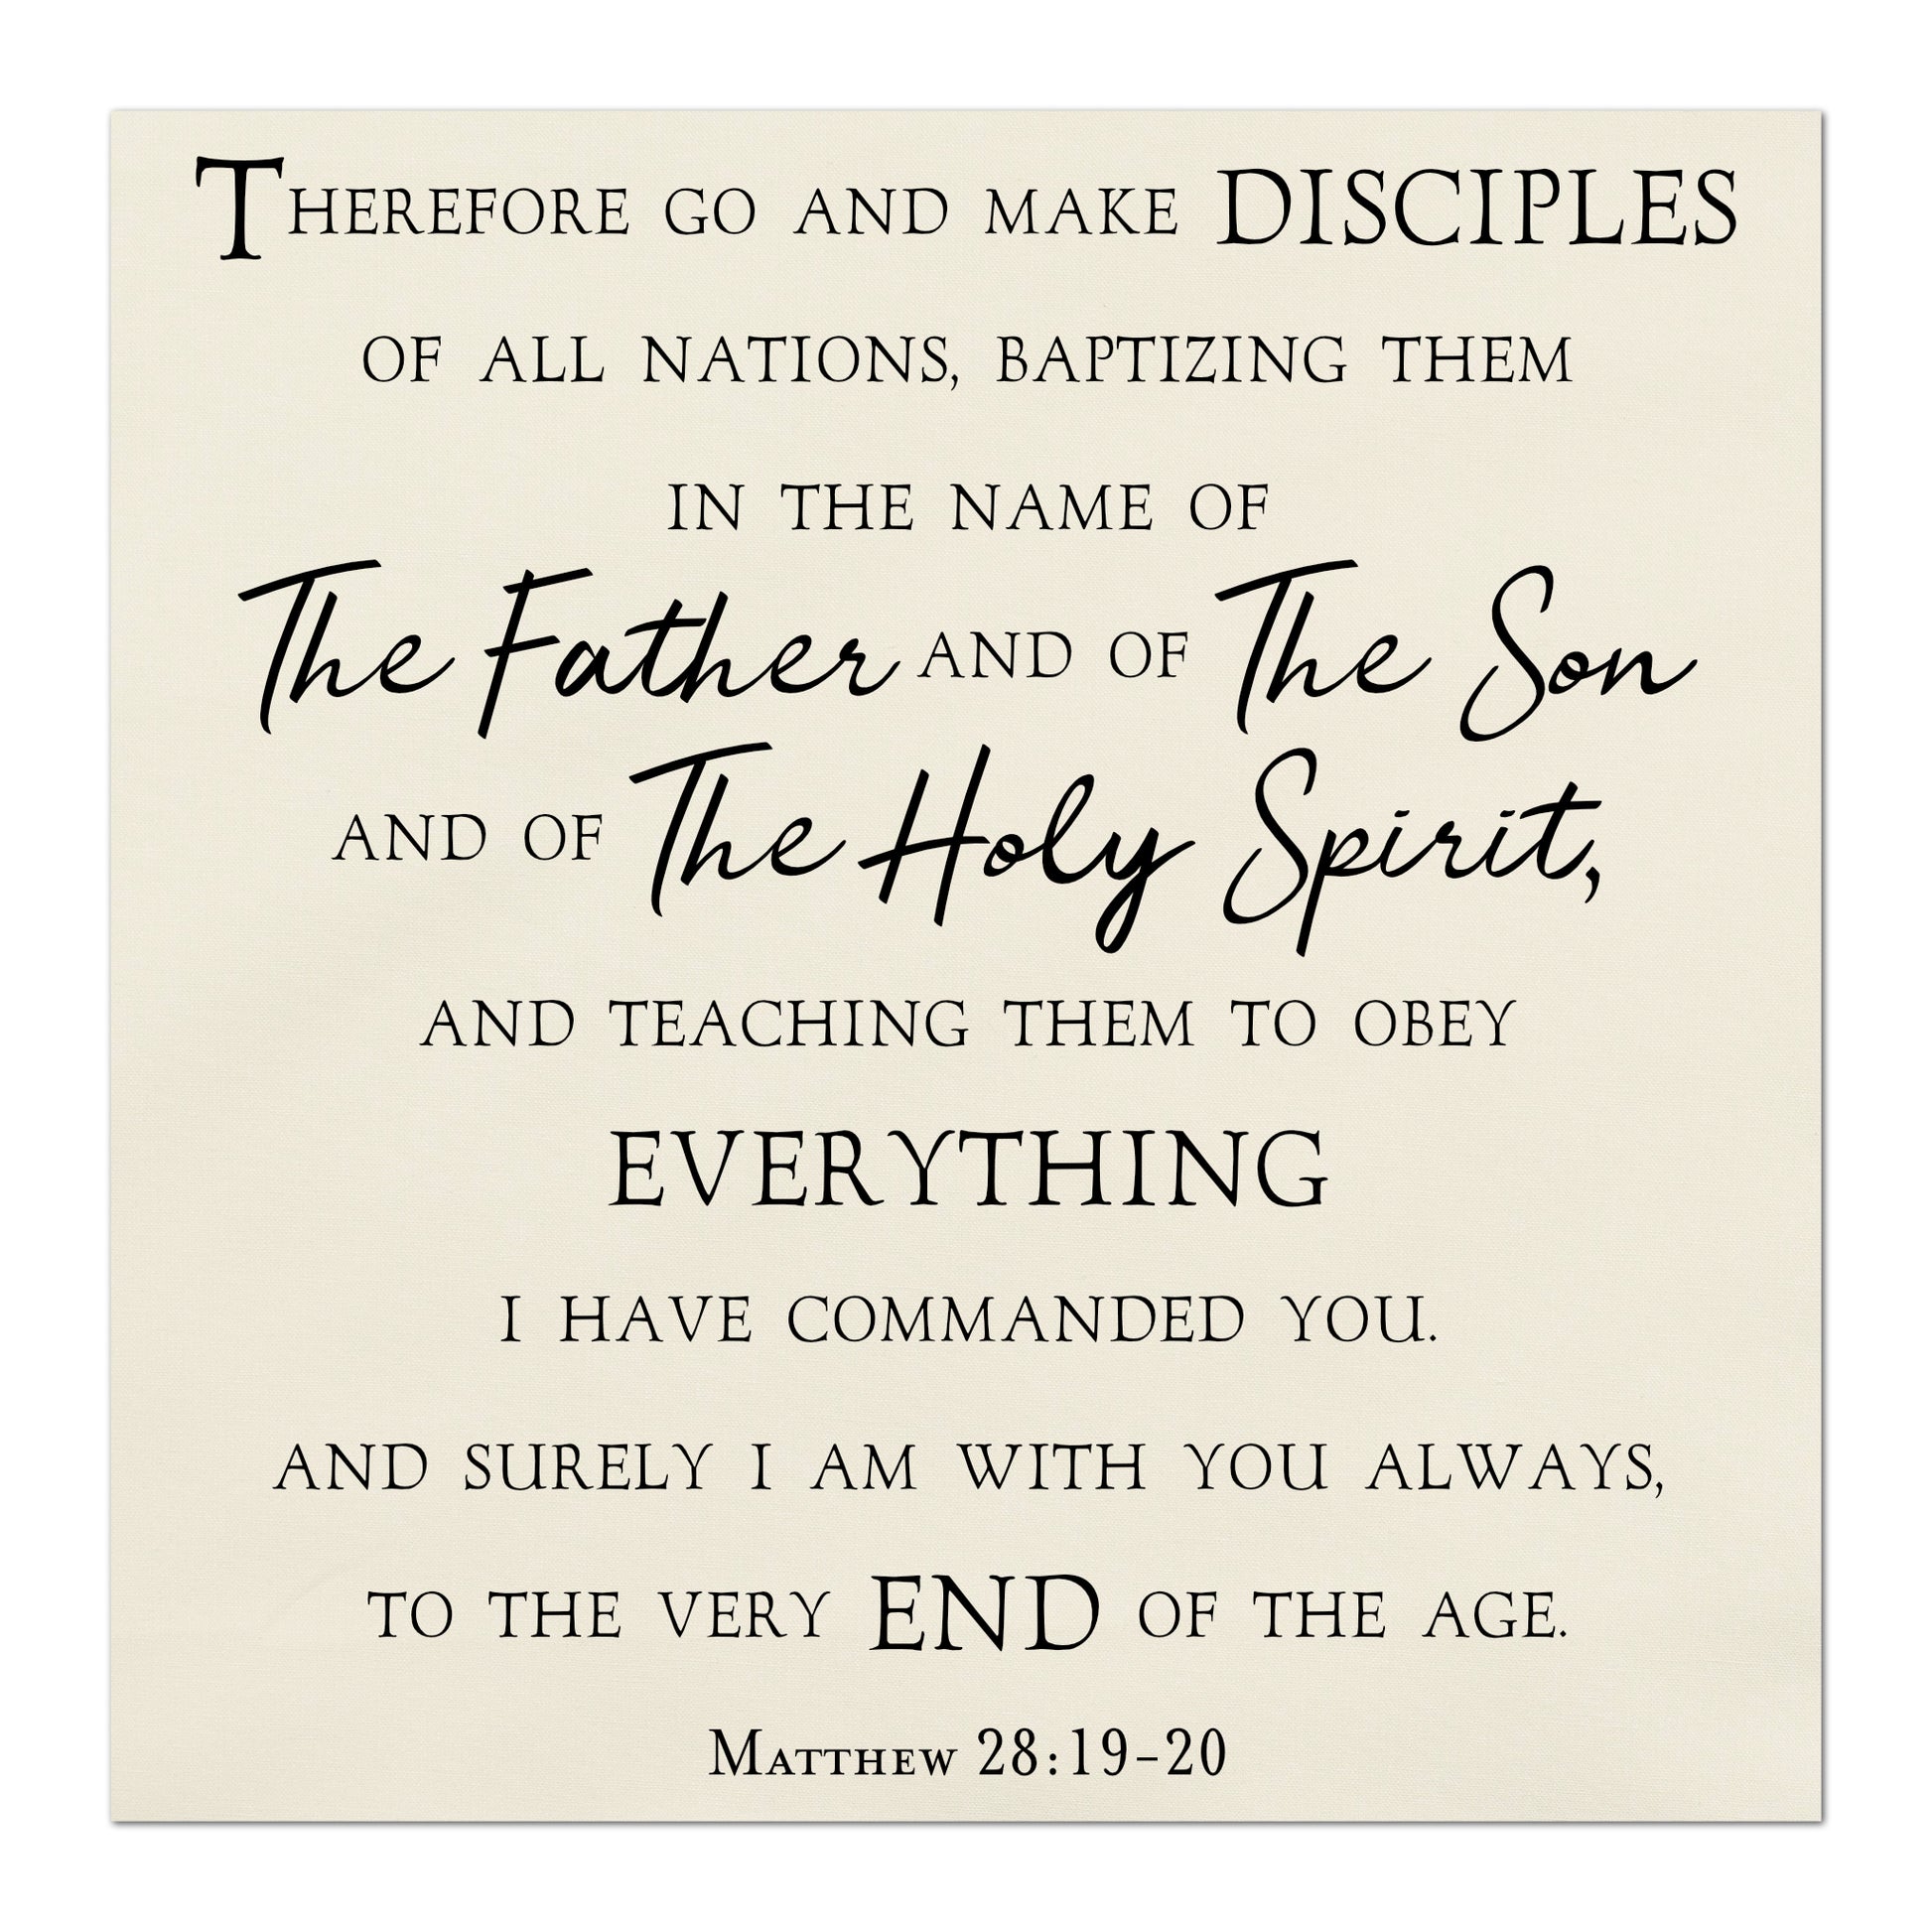 Therefore go and make disciples of all nations, baptizing them in the name of The Father and of The Son and of The Holy Spirit, and teaching them to obey everything I have commanded you.  And surely I am with you always, to the very end of the age.  Matthew 28:19-20, Fabric Panel Print, Religious Fabric, Scripture, Bible Verse Wall Art, Quilt Block